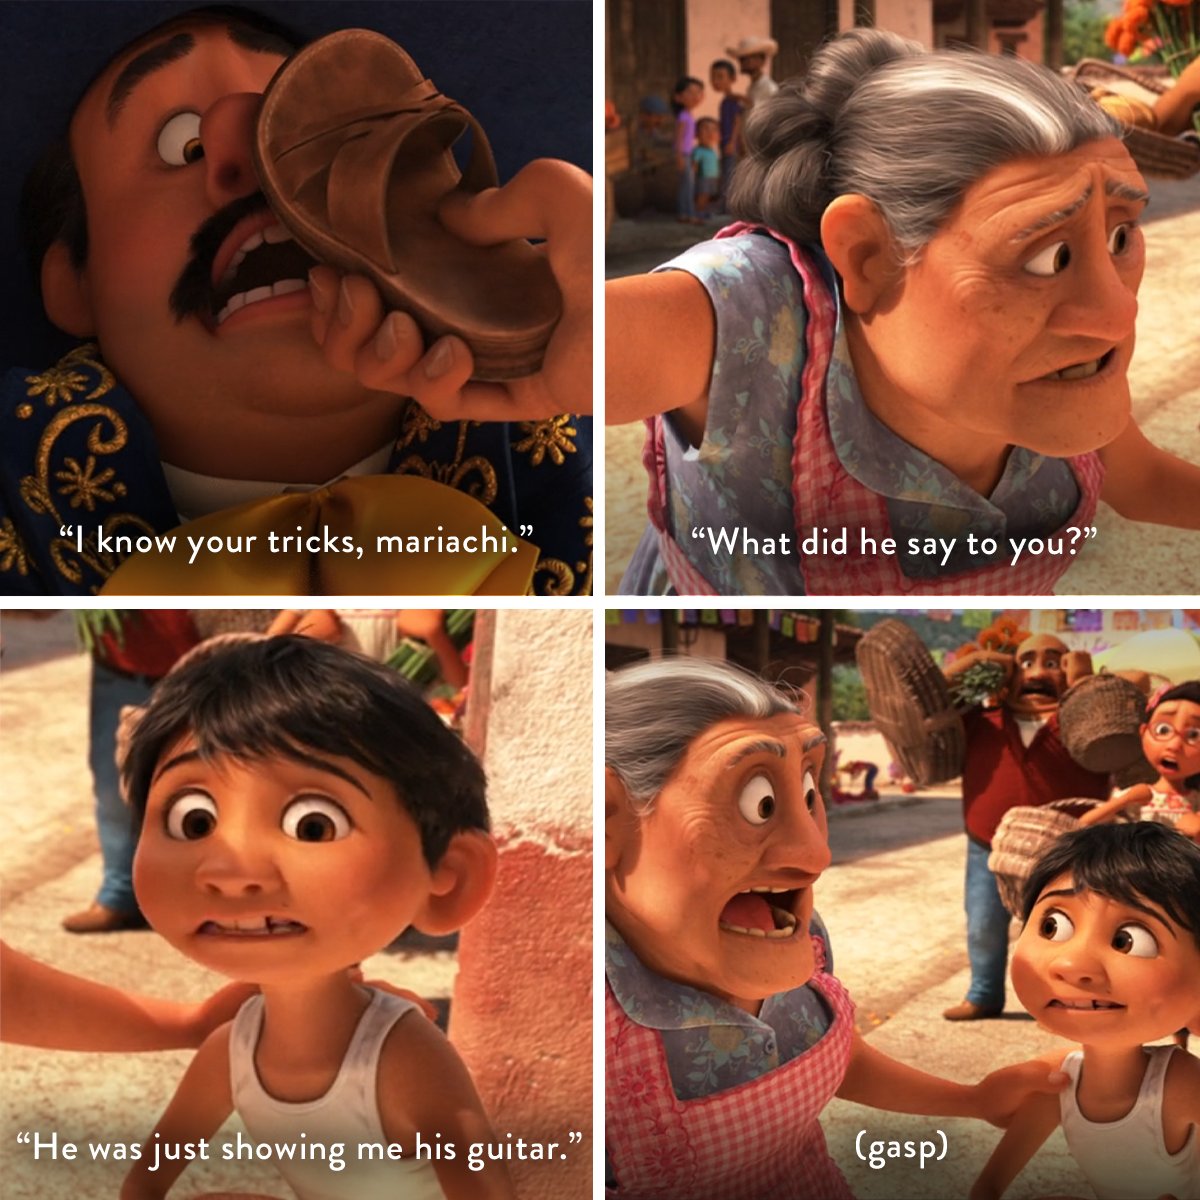 Note: avoid bringing up guitarras in front of Abuela.  

You can stream Coco subbed and dubbed in Spanish and Portuguese on Disney+. #VocesUnidas